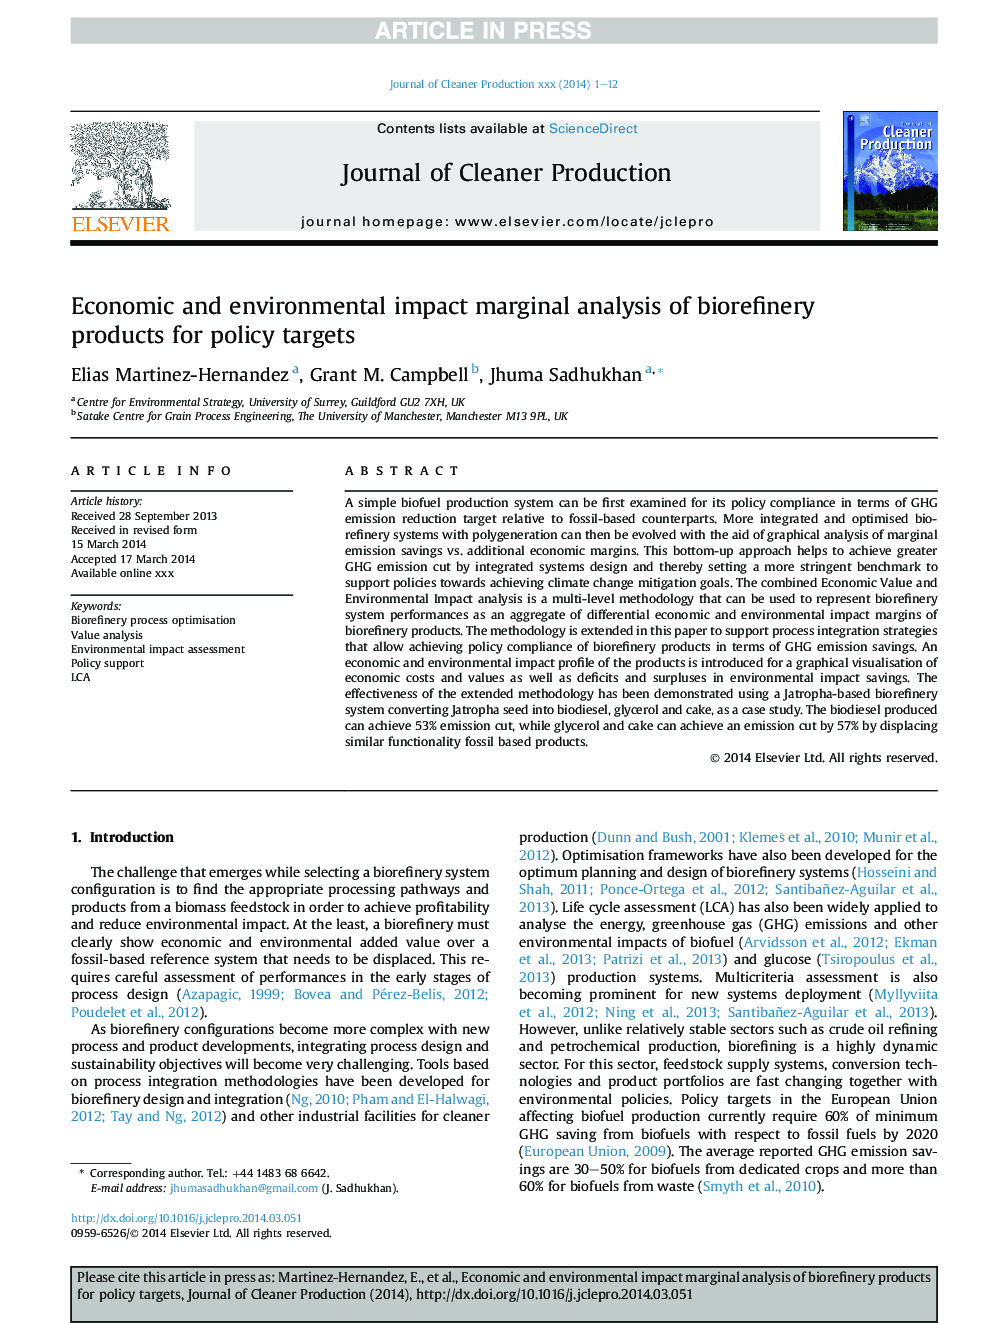 Economic and environmental impact marginal analysis of biorefinery products for policy targets